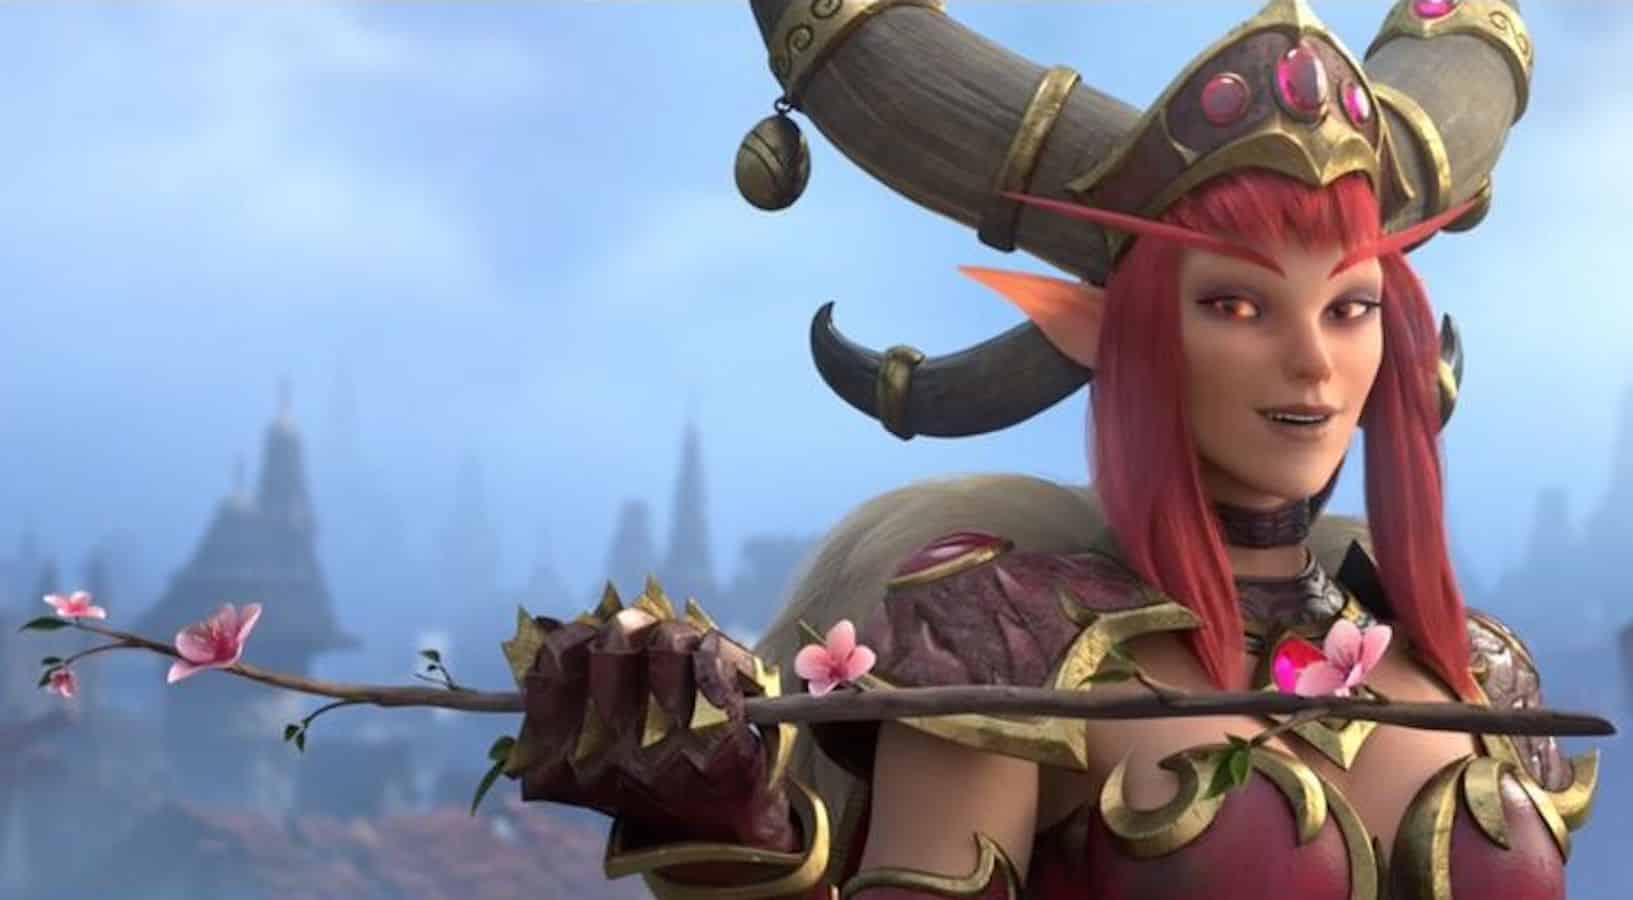 world of warcraft wow alexstrasza offers a cherry blossom in blizzcon 2017 video with Overwatch's hanzo